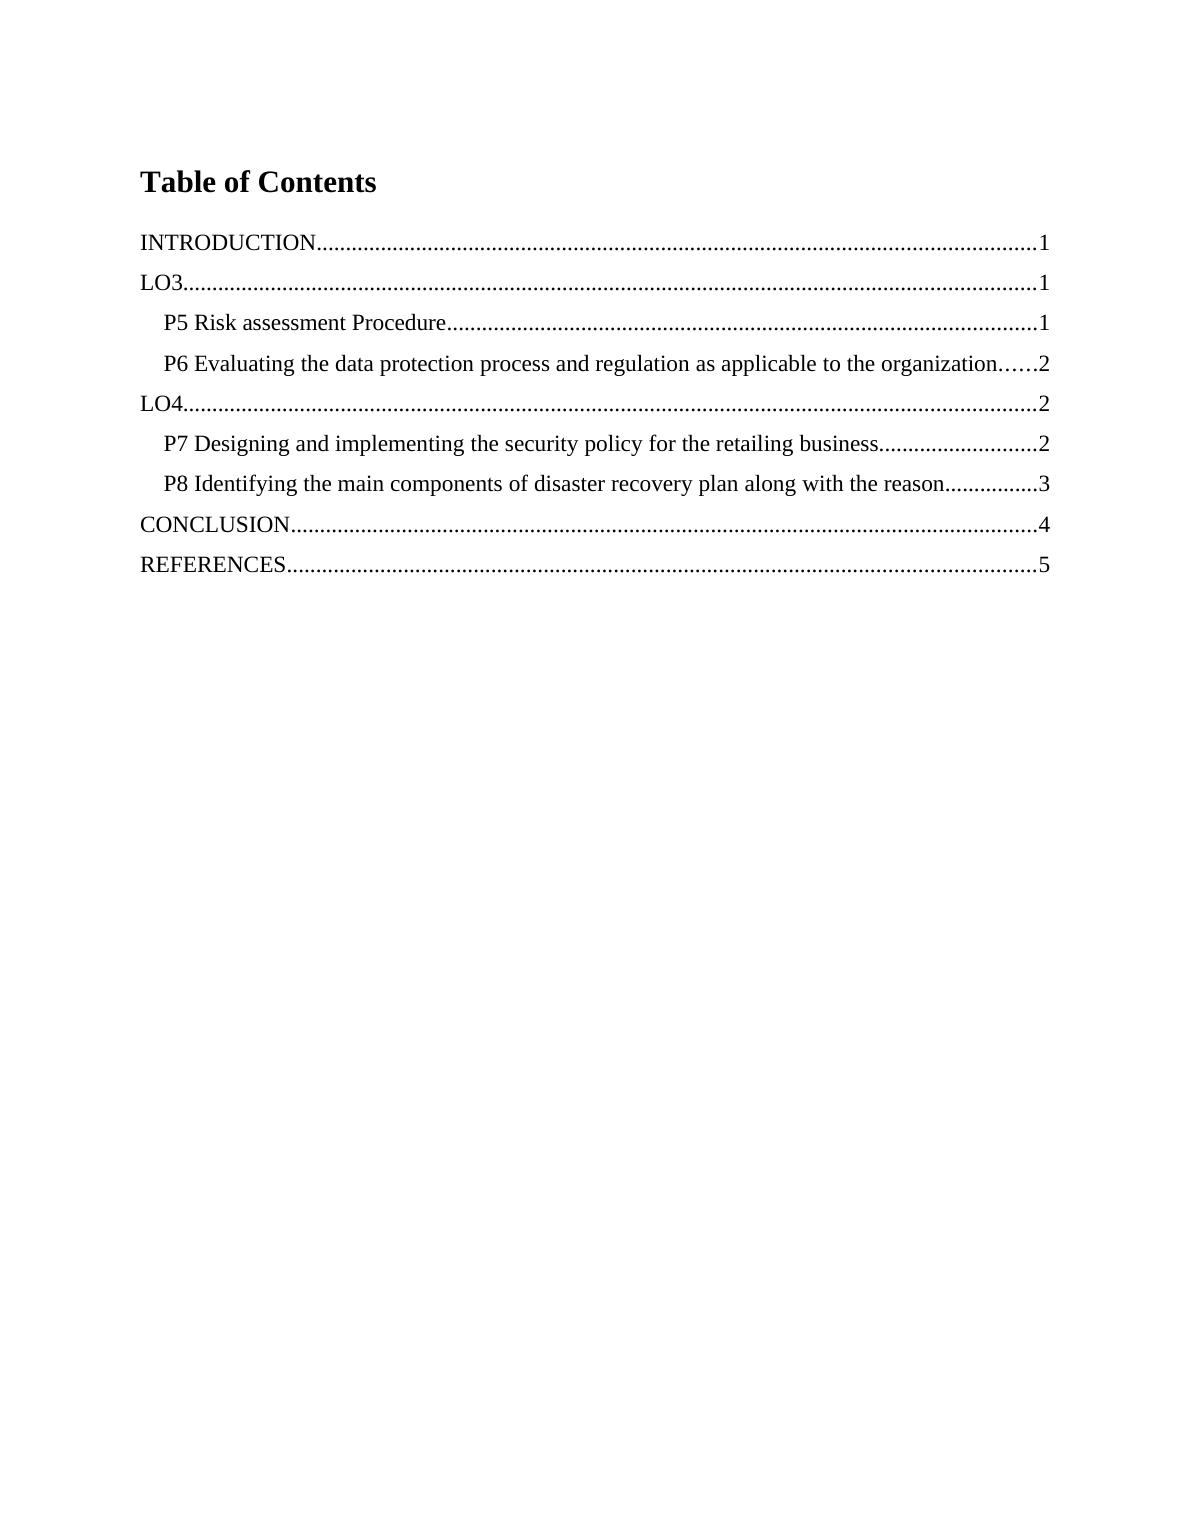 Assignment on IT Security pdf_2